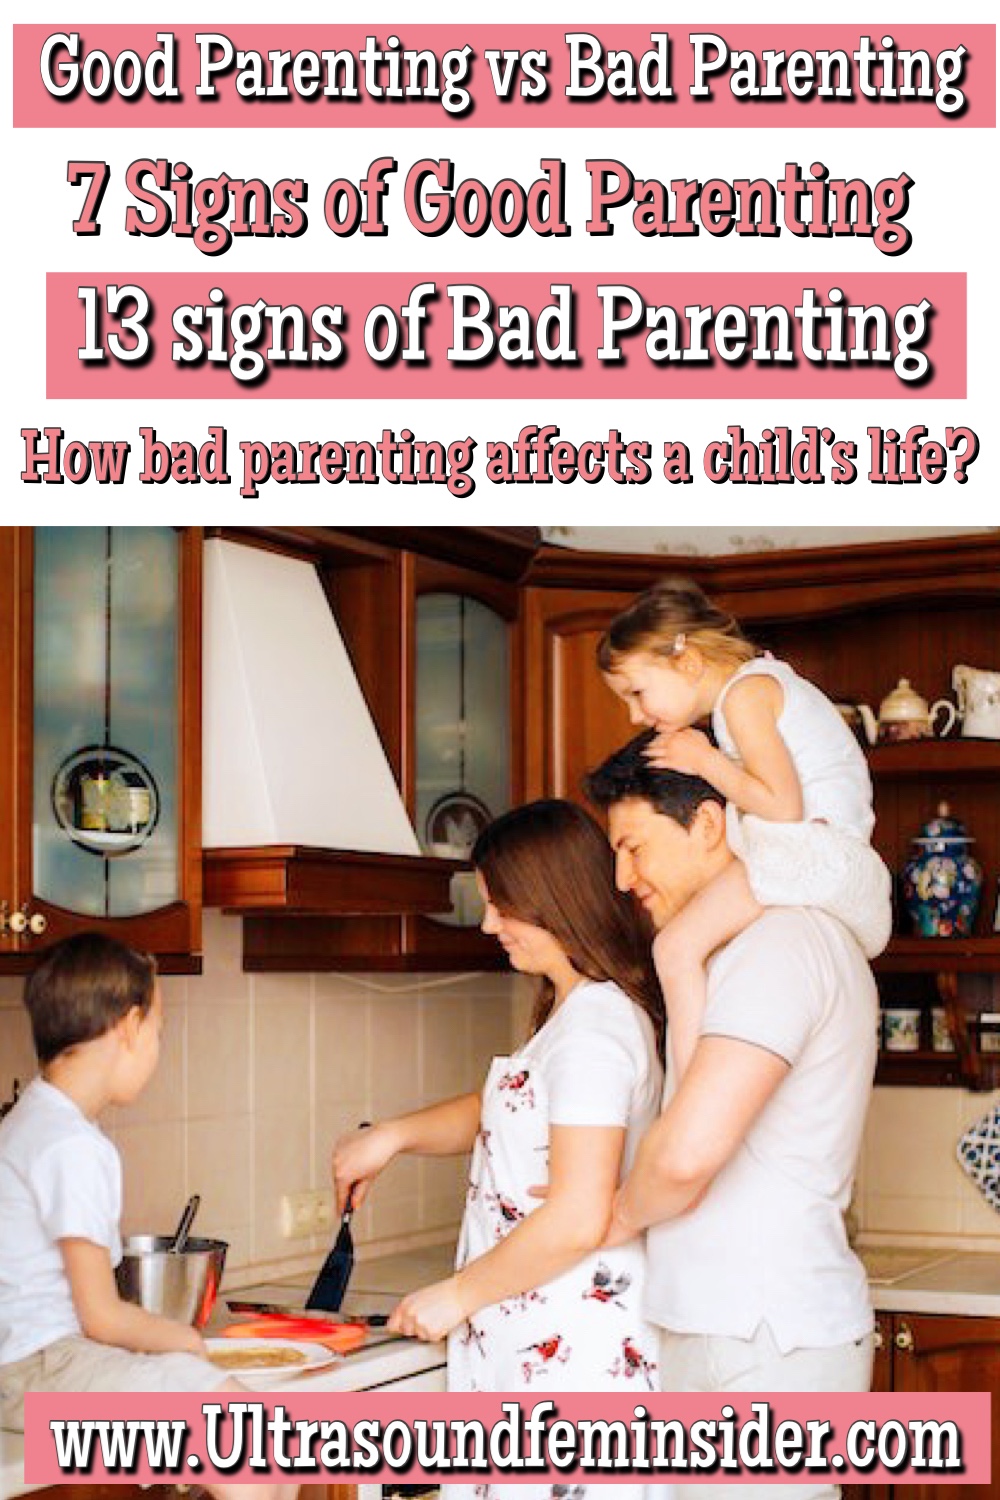 Signs of Good Parenting vs Bad Parenting. Here is What you should know.